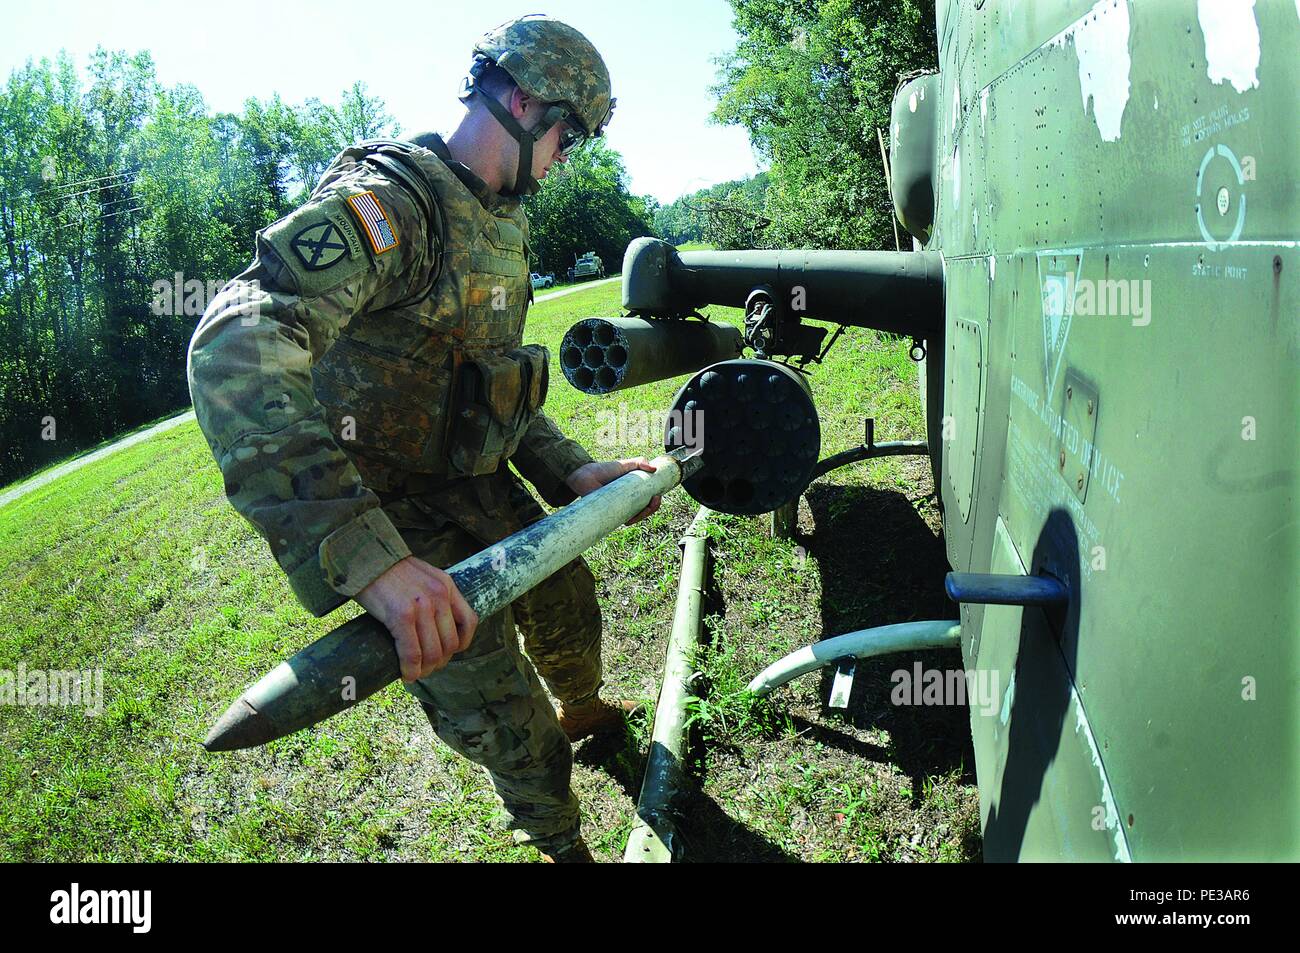 Staff Sgt. Dustin Bussard, 74th Ordnance Company (Explosive Ordnance Disposal) and representing U.S. Army Pacific Command, carefully removes a rocket from the pod of a downed Cobra helicopter (simulated) during an event of the EOD Team of the Year Competition Sept. 17 at Fort A.P. Hill. Bussard’s team, which included Spc. Matthew Hamilton and Cpl. Ryan Voss, beat out five others to win the title. The 74th is an element of the 303th Ordnance Battalion, 45th Sustainment Brigade, 8th Theater Support Command, located at Schofield Barracks, Hawaii. Stock Photo